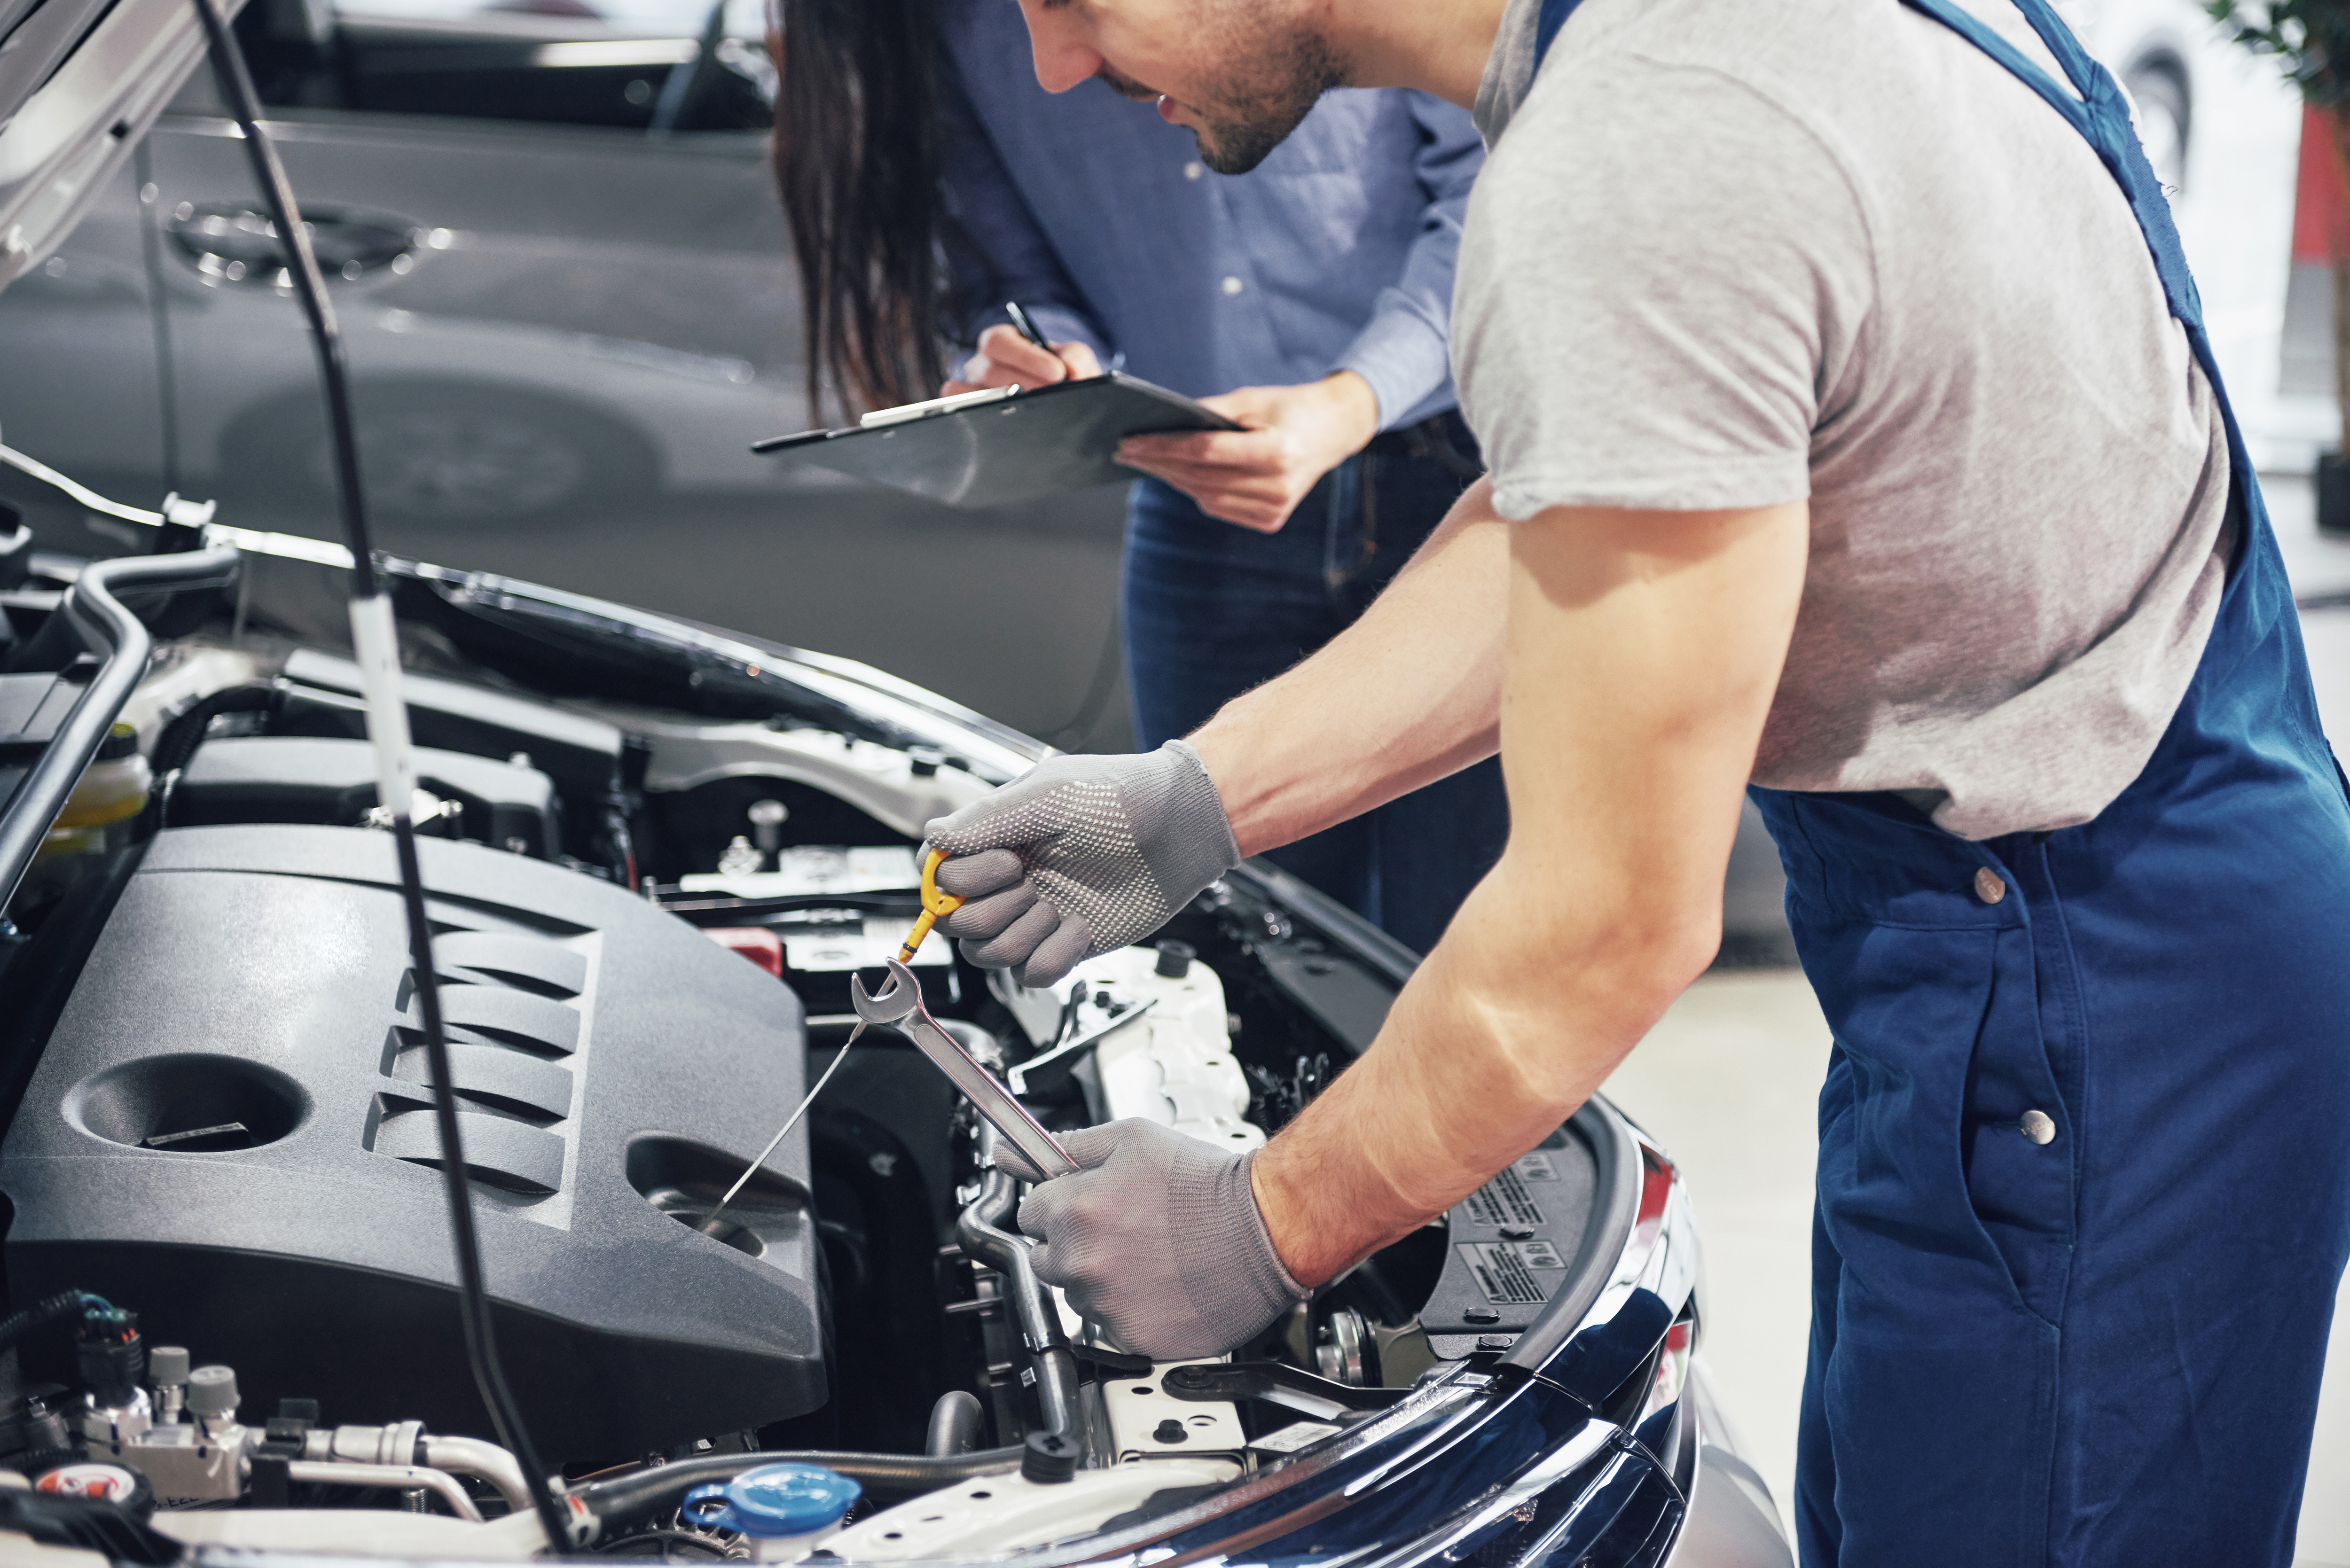 Typical Car Problems That Drain Your Wallet: How to Save on Common Repairs